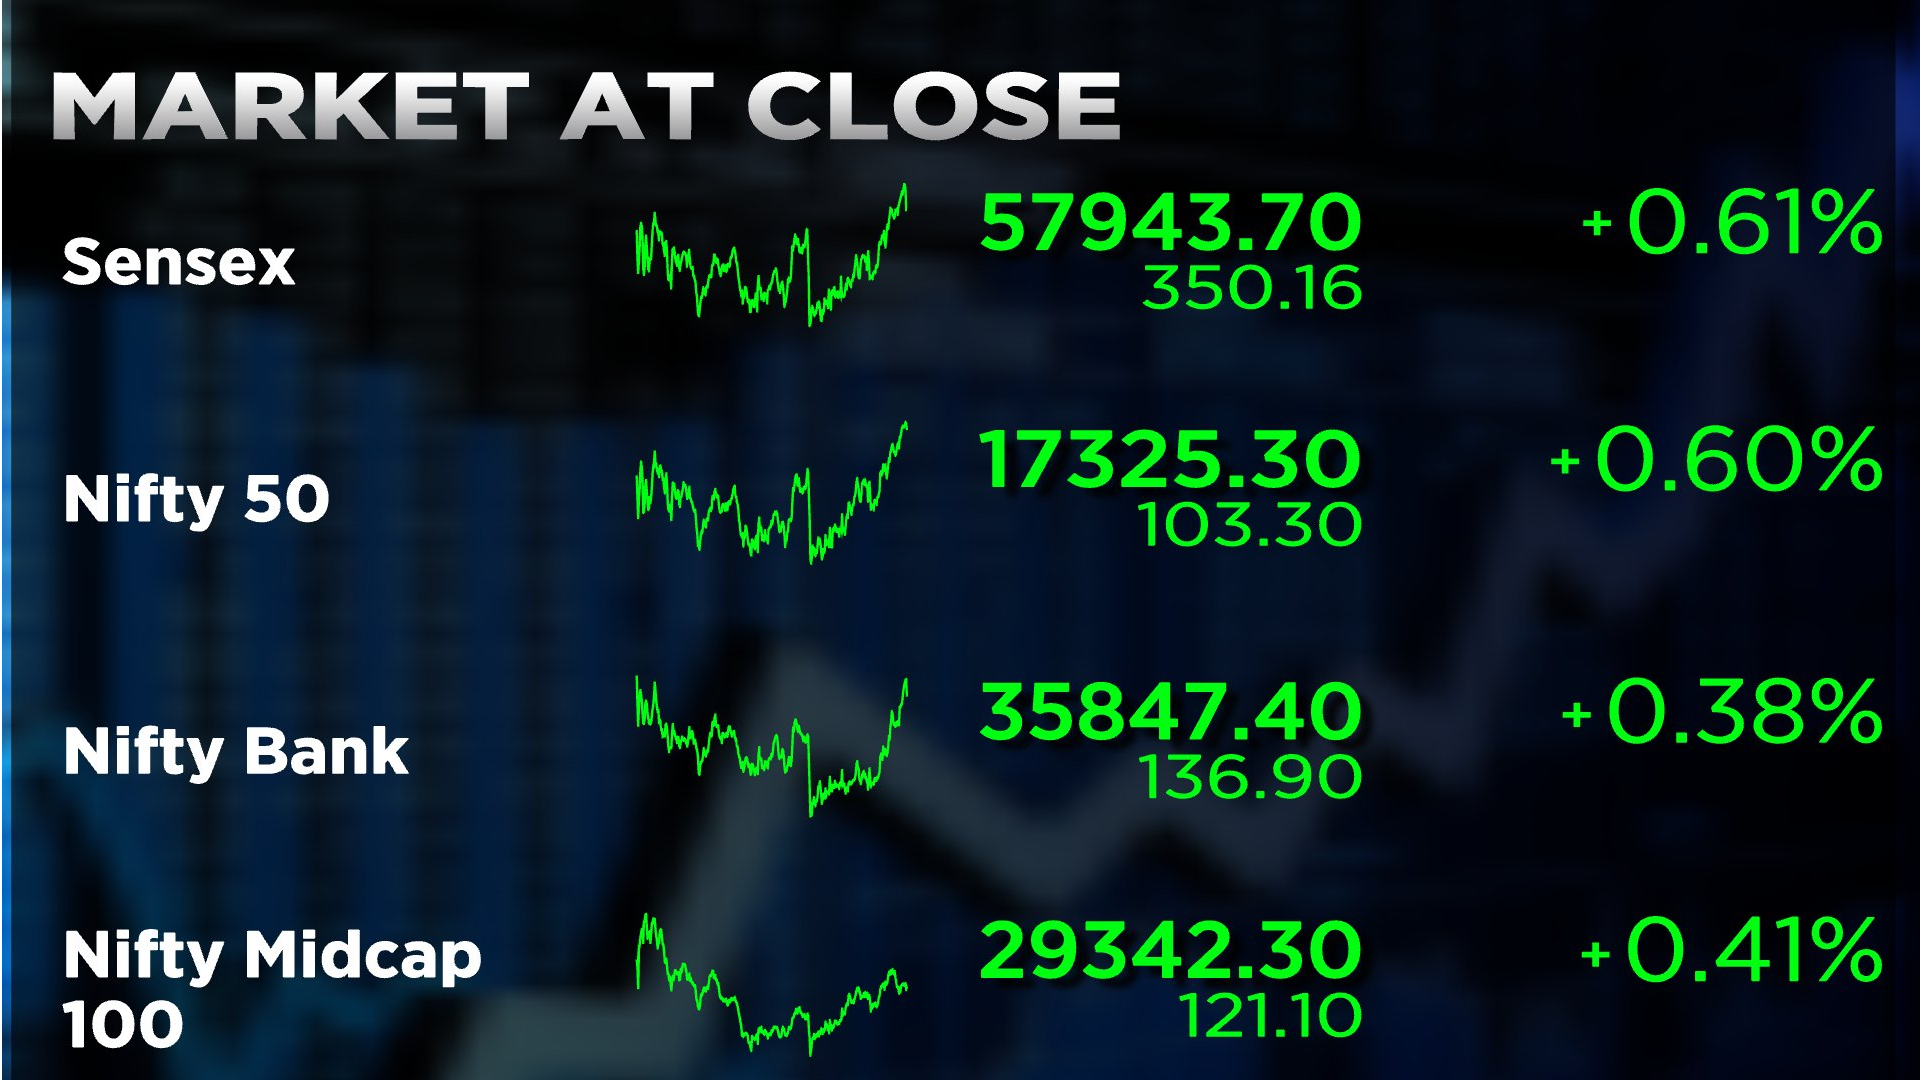 Stock Market Highlights: Sensex ends 350 pts higher, Nifty50 crosses 17,300 led by financial, IT stocks; VIX falls 6%